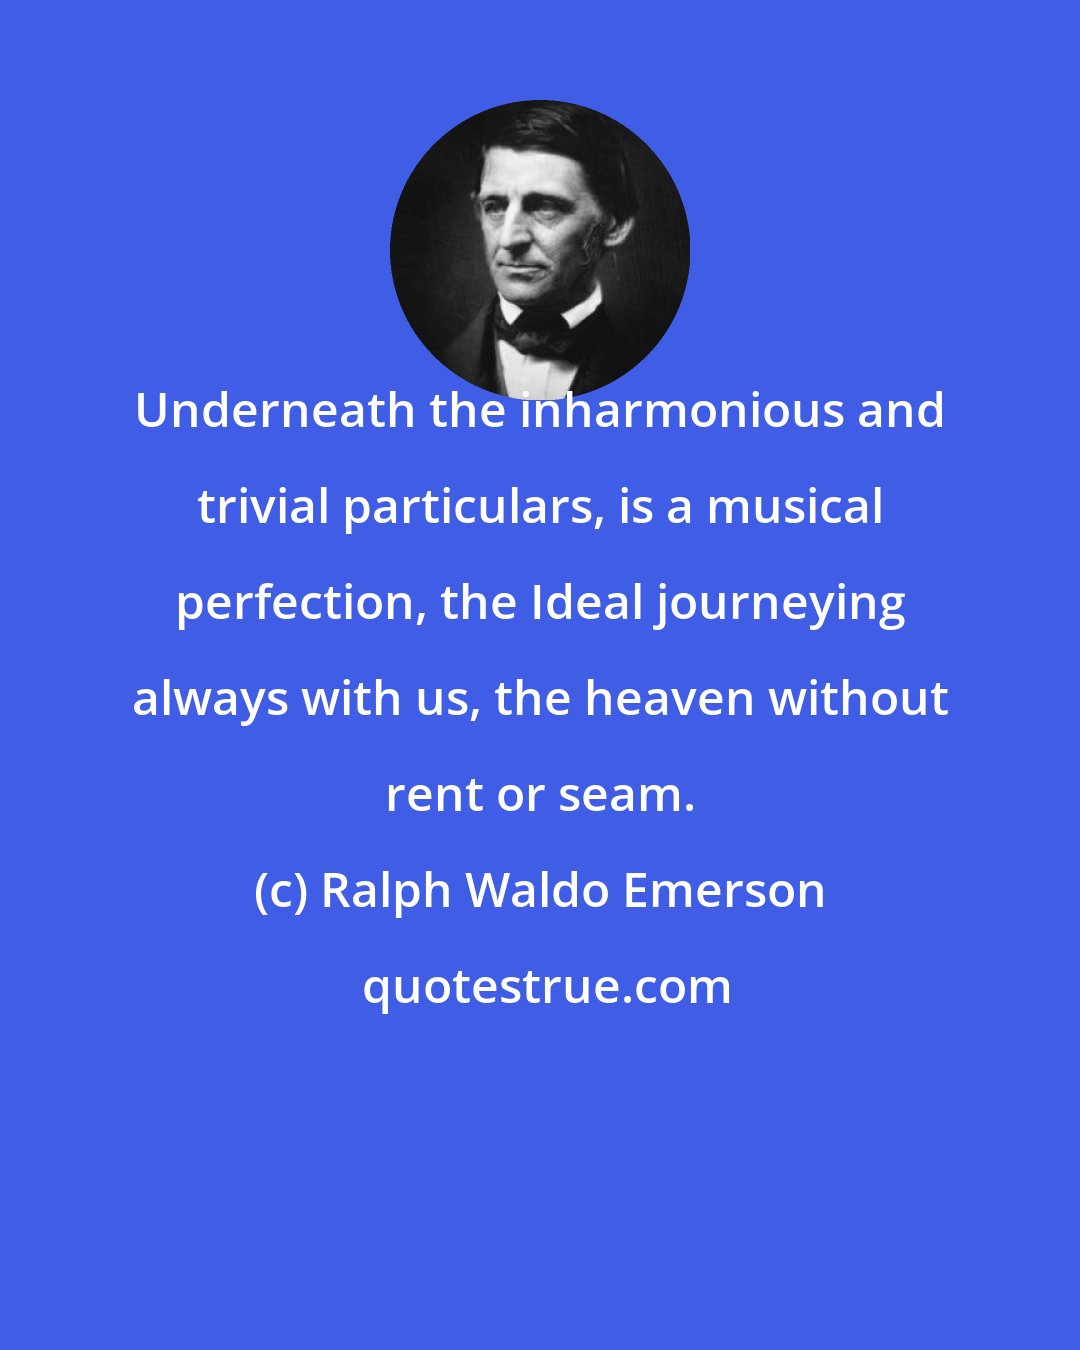 Ralph Waldo Emerson: Underneath the inharmonious and trivial particulars, is a musical perfection, the Ideal journeying always with us, the heaven without rent or seam.